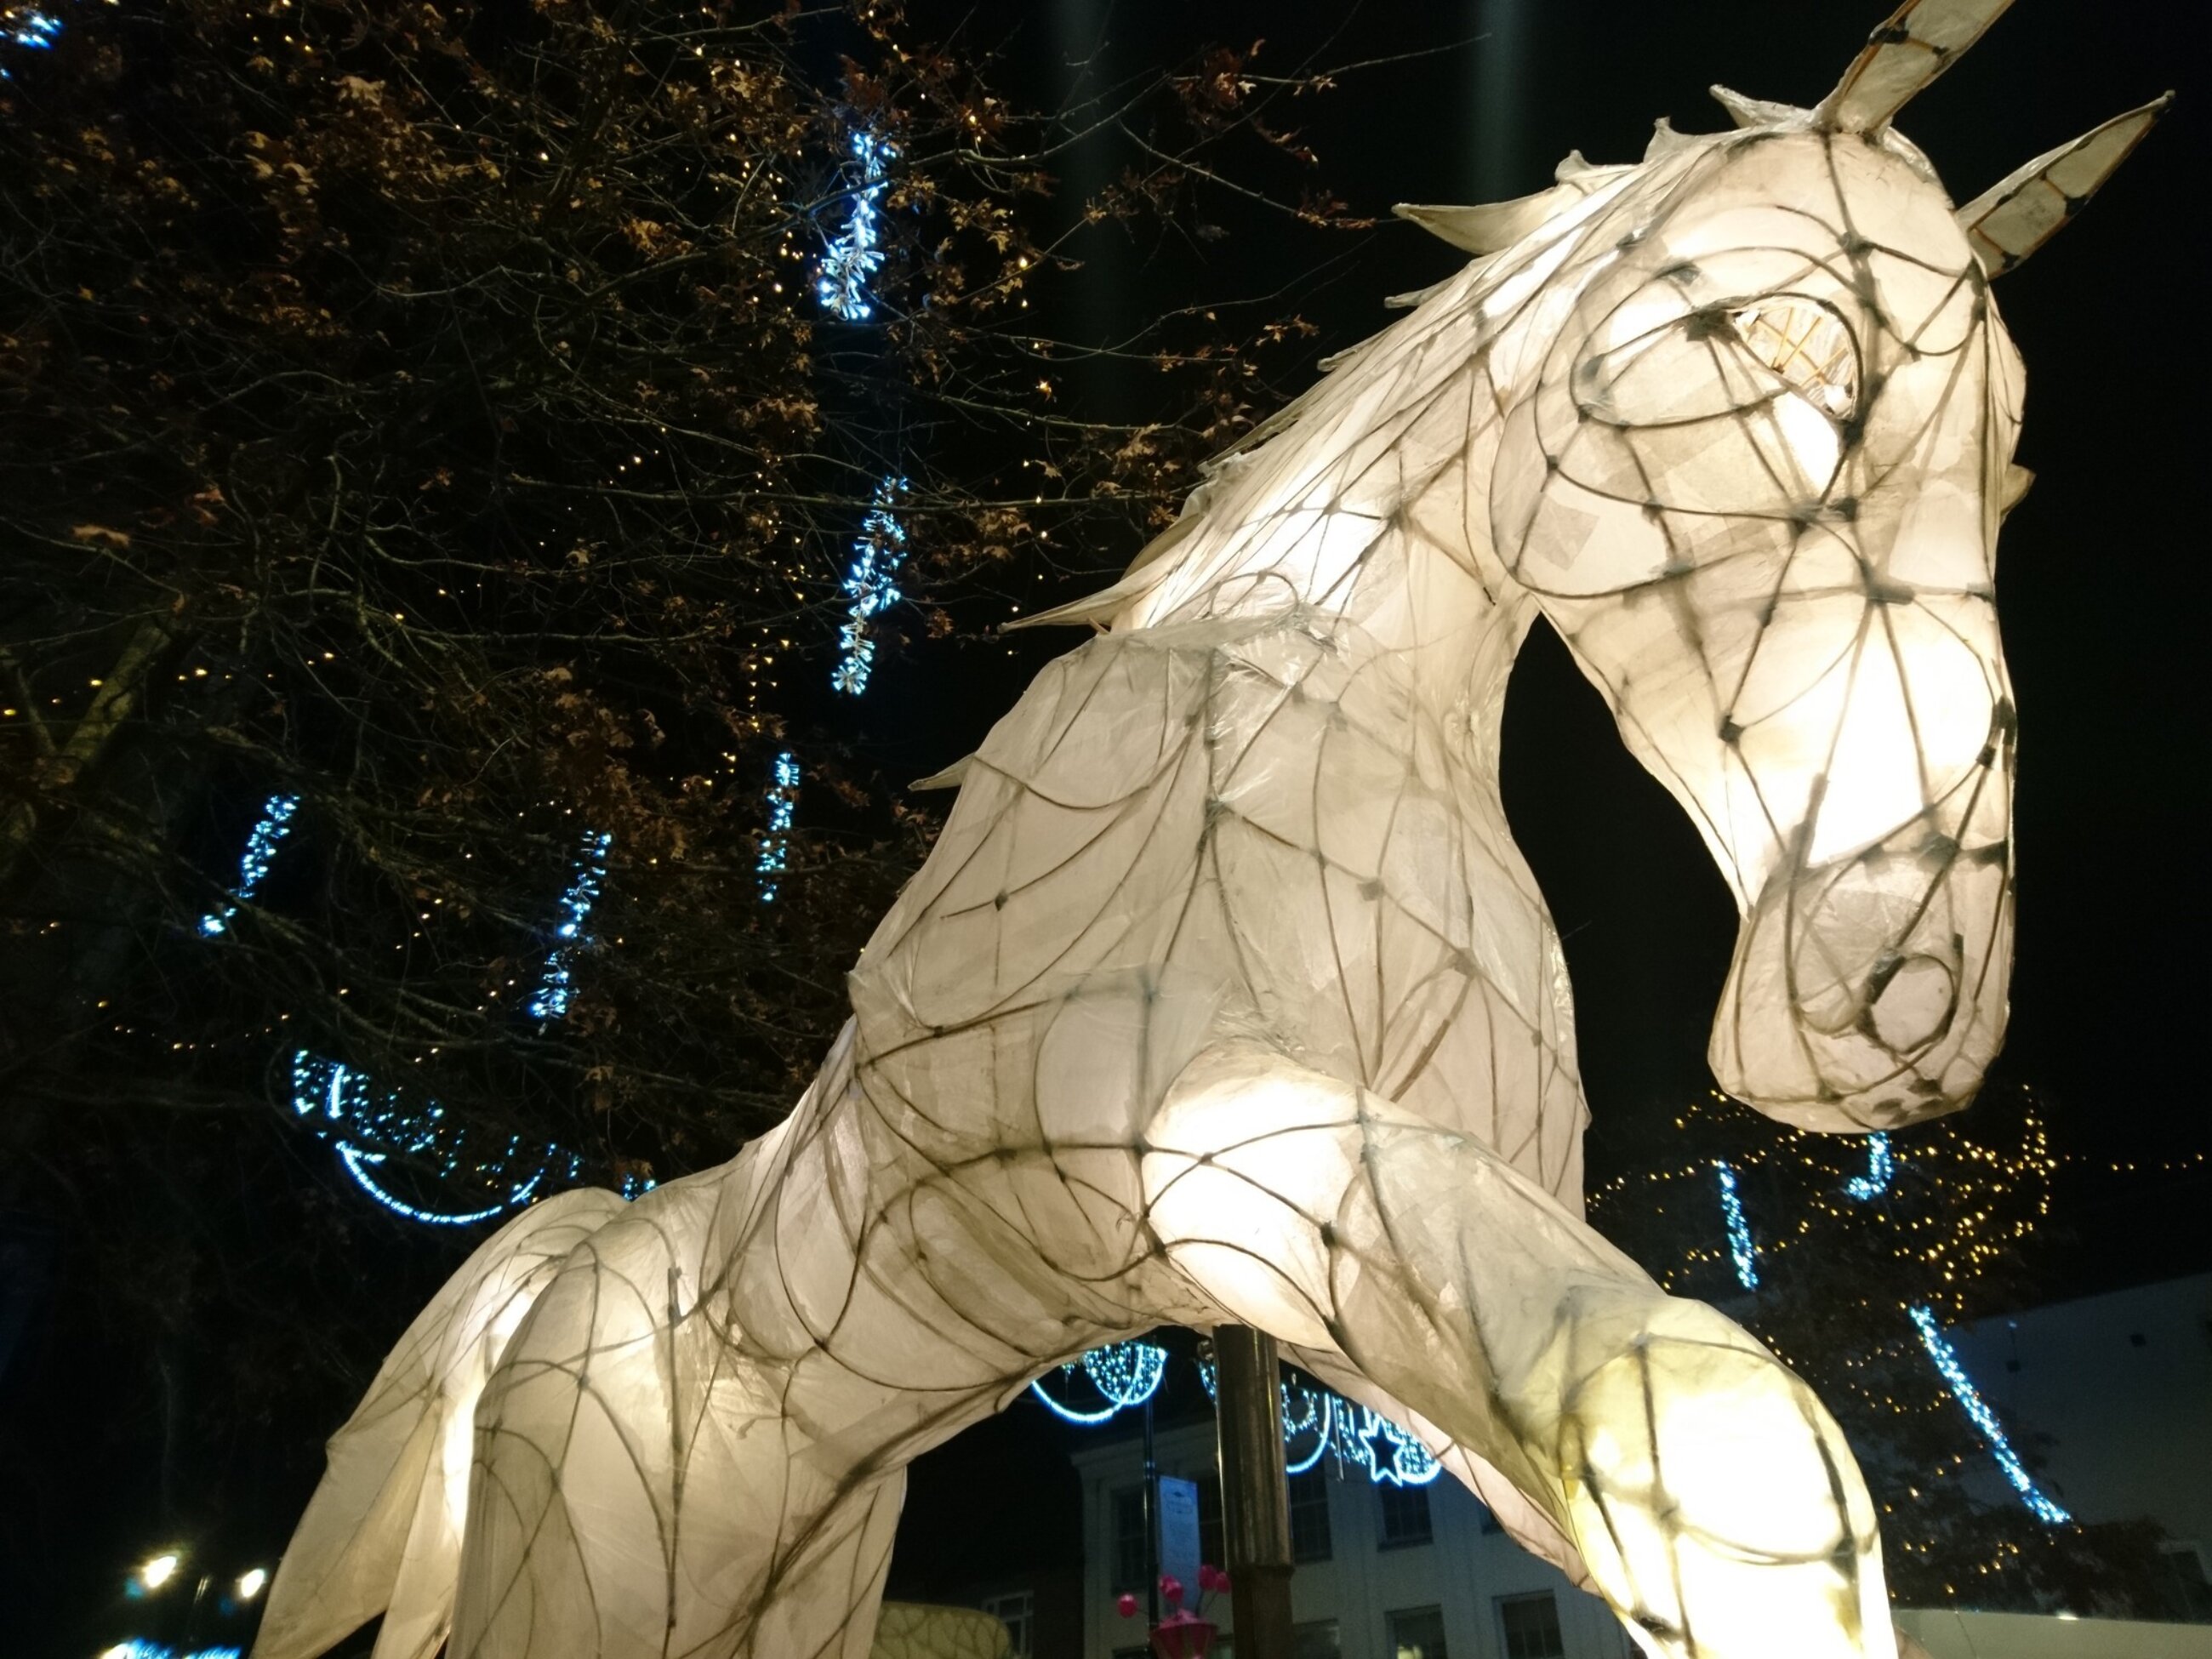 A giant leaping horse made of withies and paper